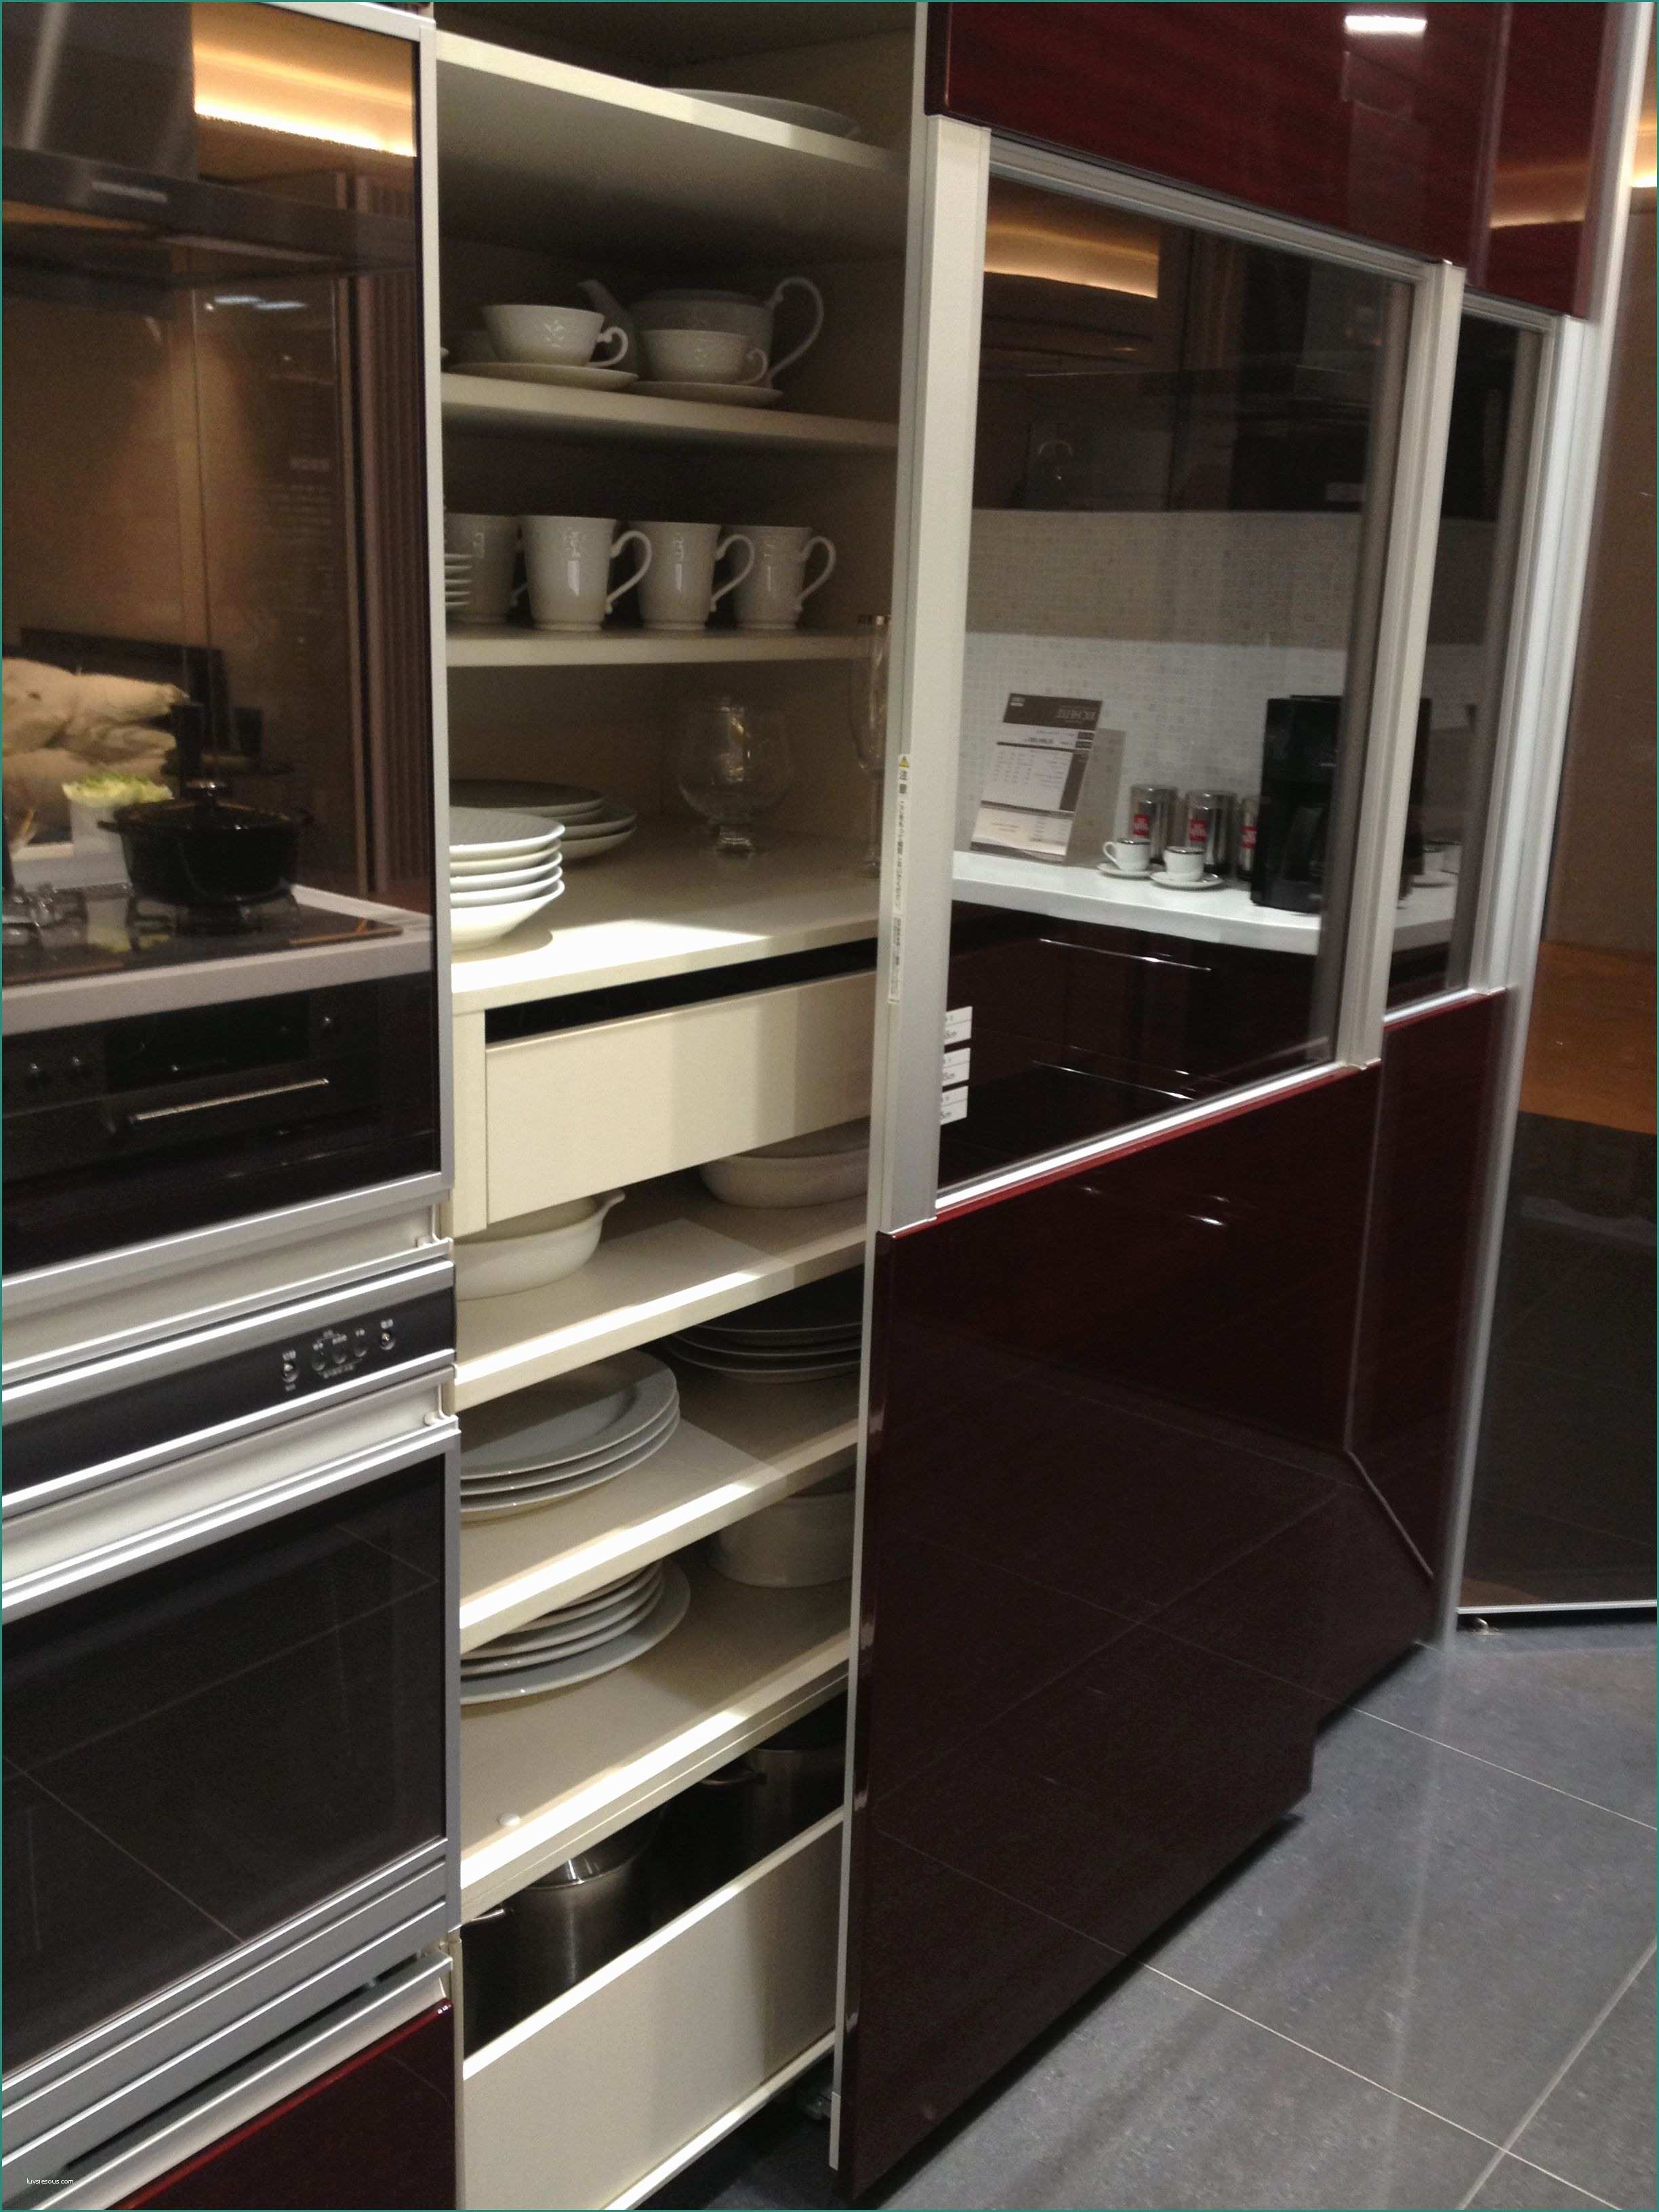 Cucina Piccola Angolare E Vertical Swinging Doors Pops Out then Move Sideway In Front Of the